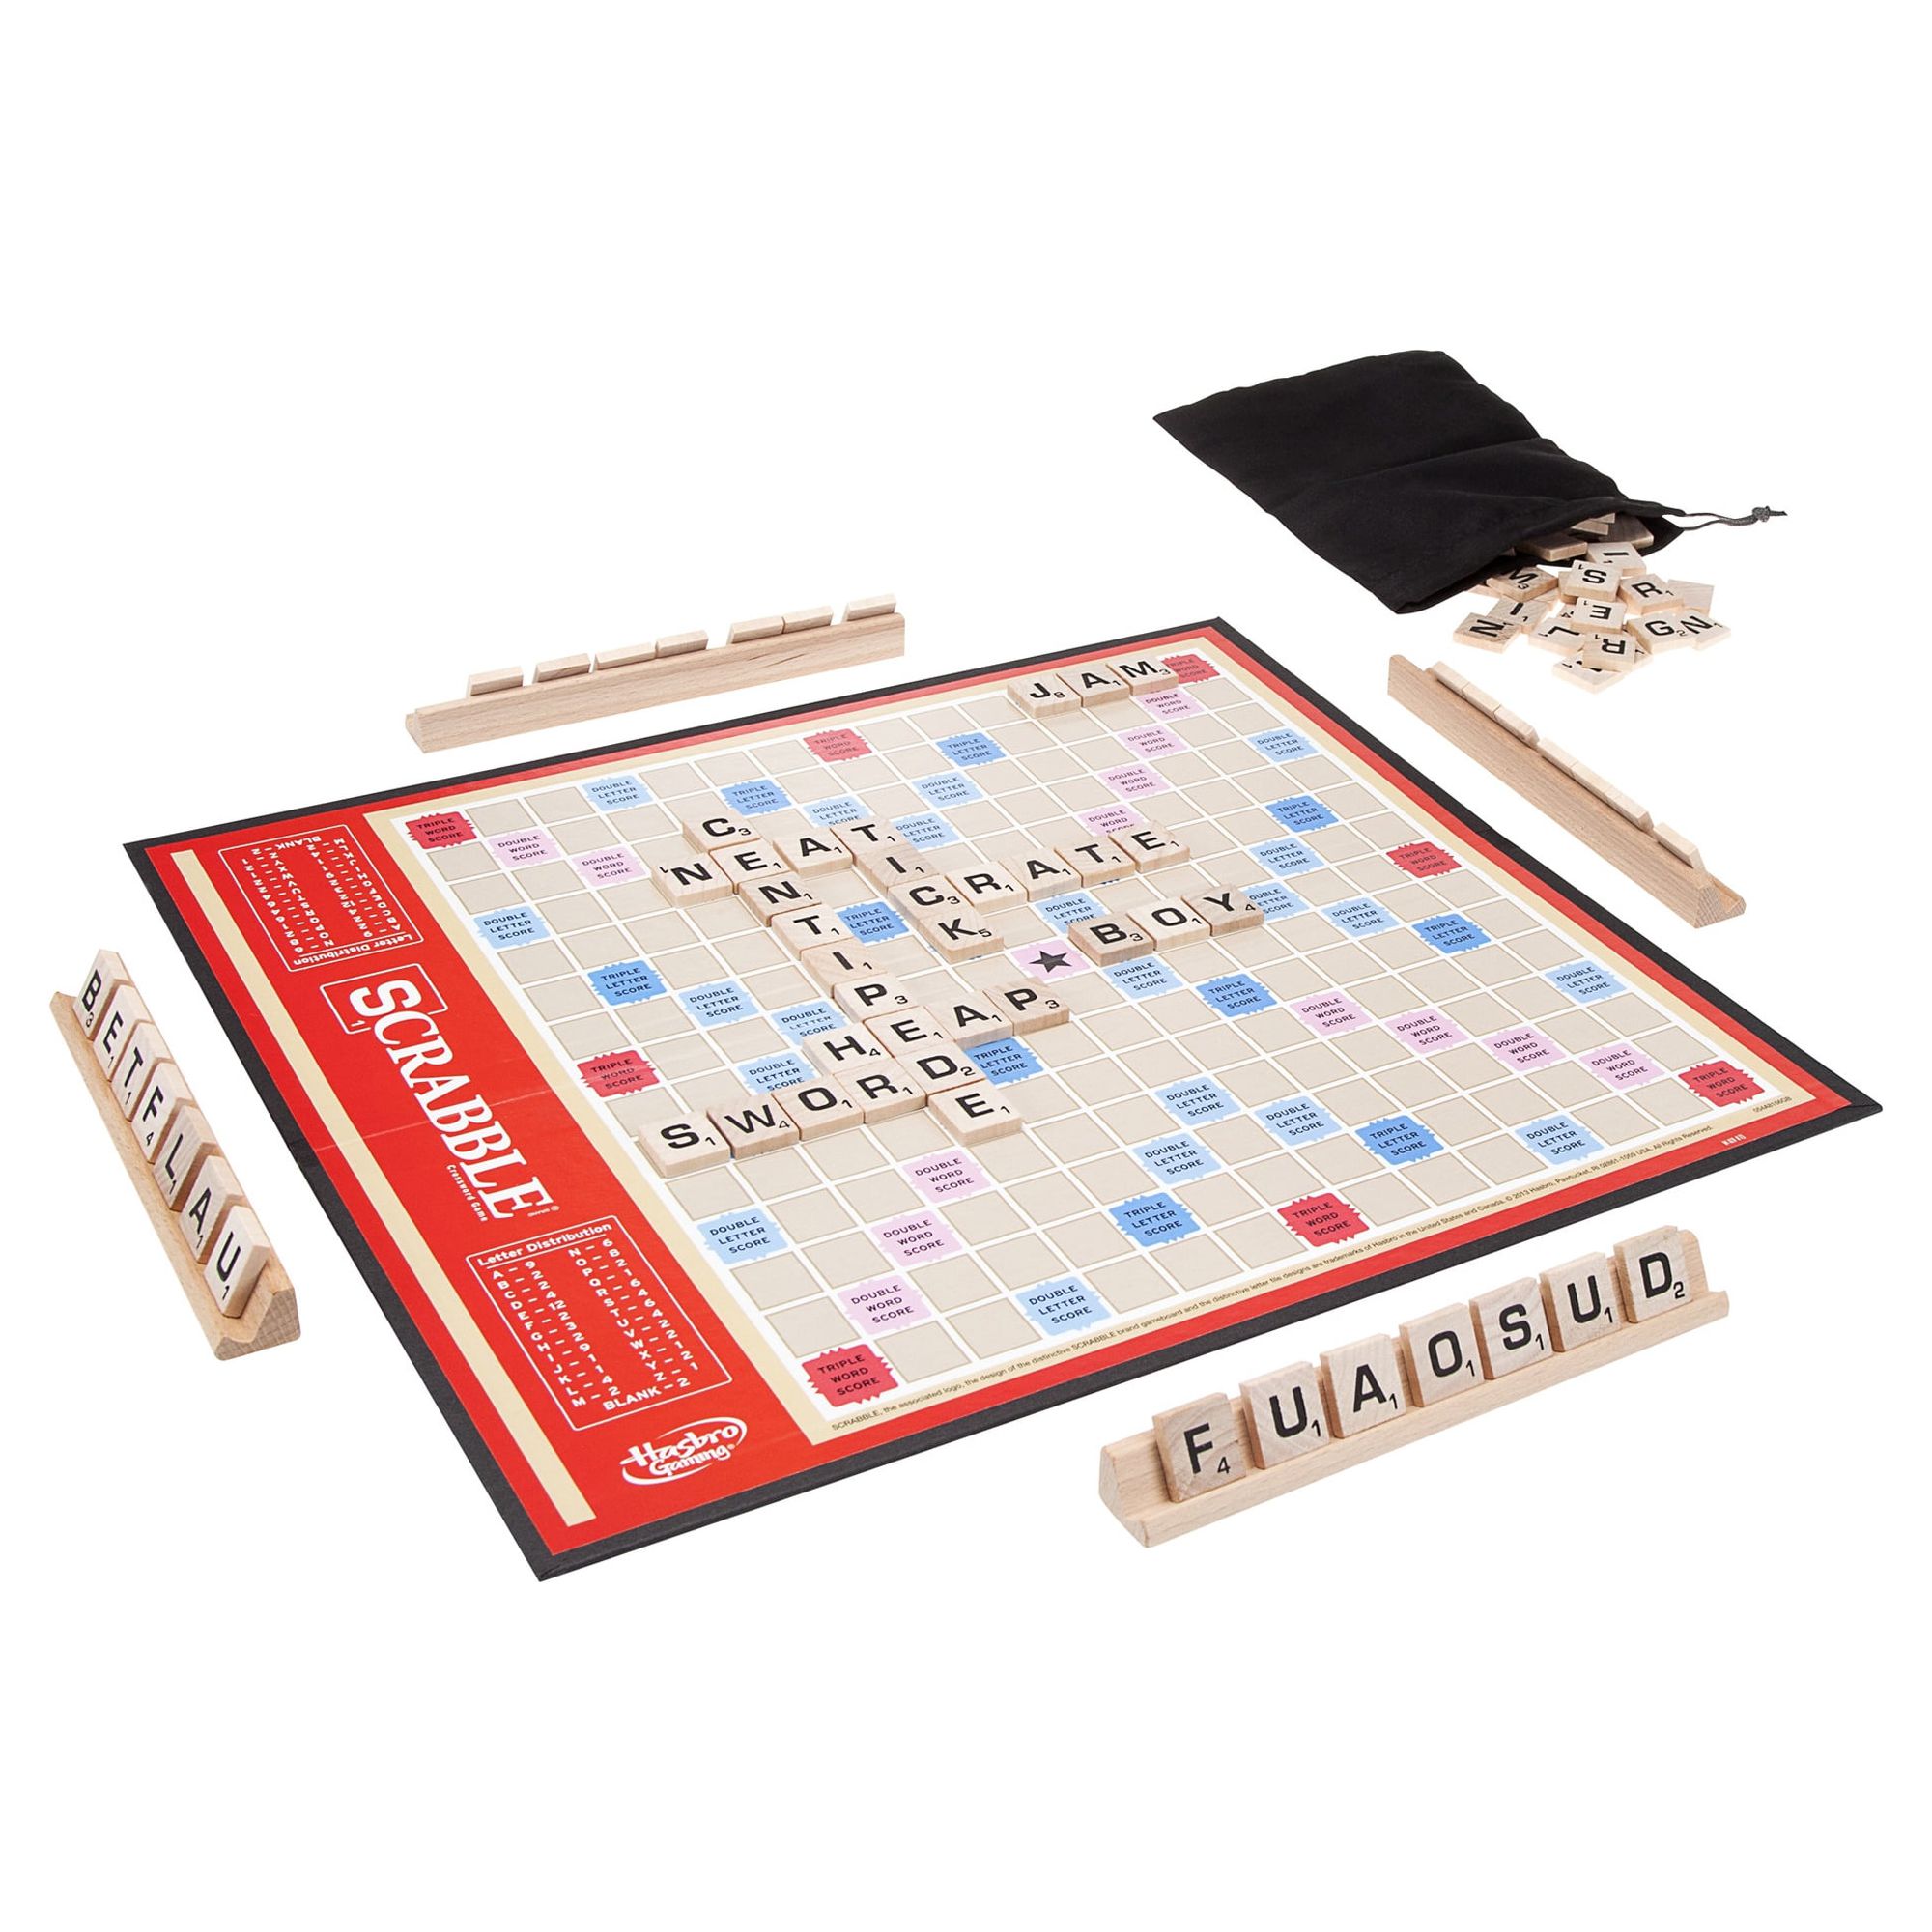 Scrabble Game - image 3 of 14